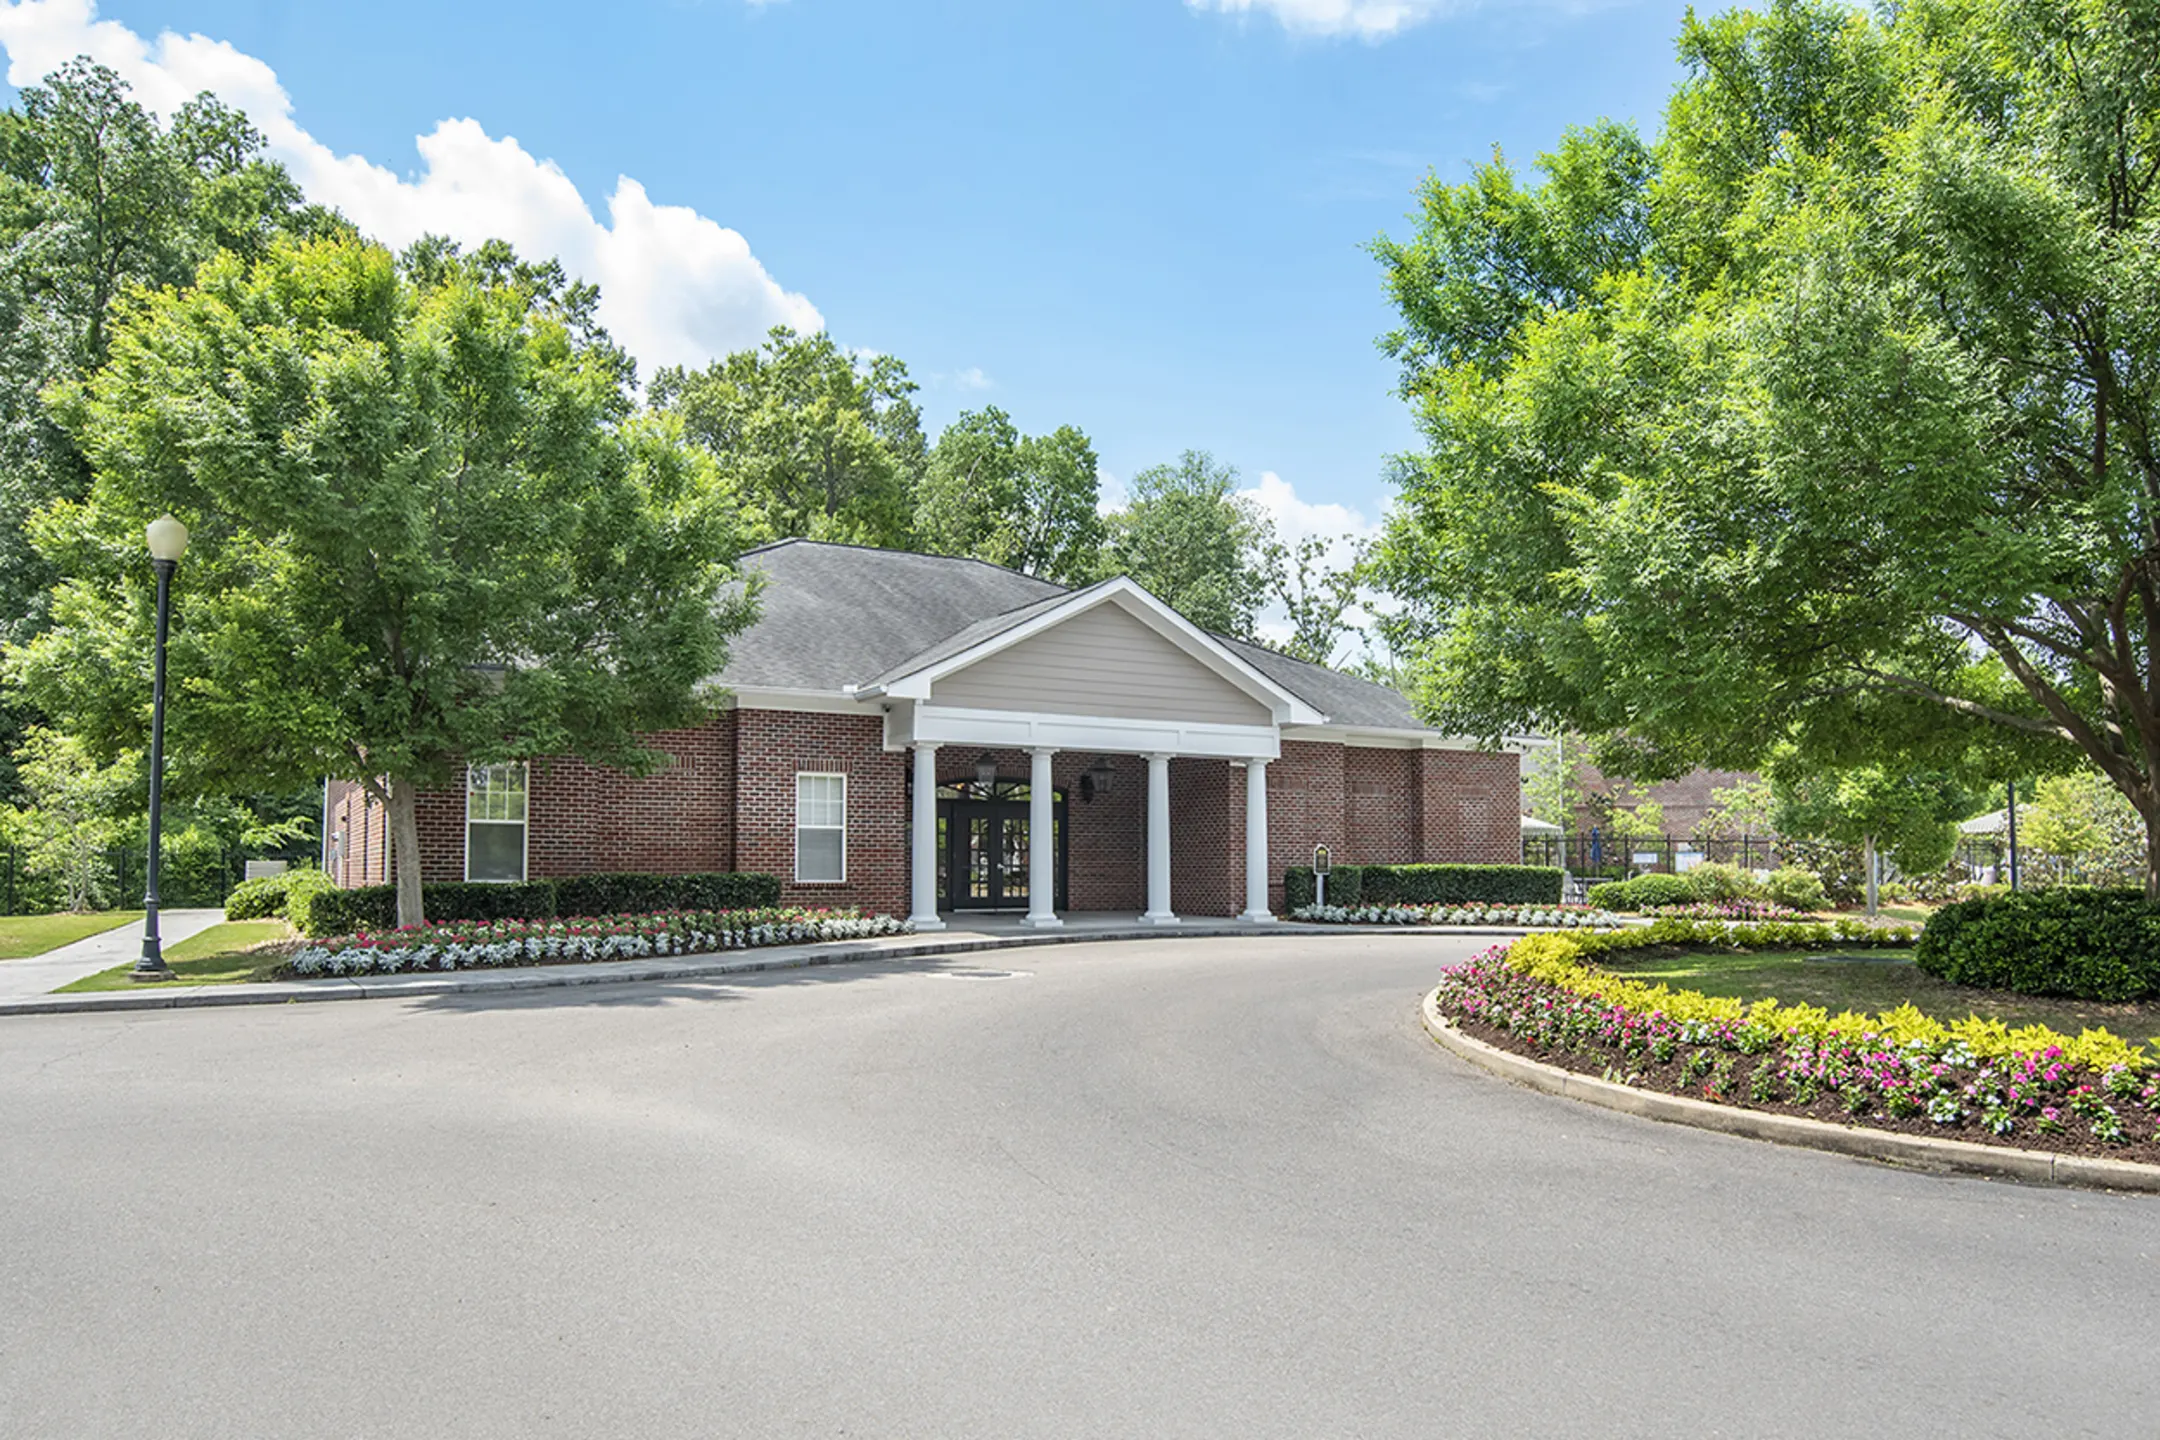 Building - Broadstreet At EastChase Apartments - Montgomery, AL